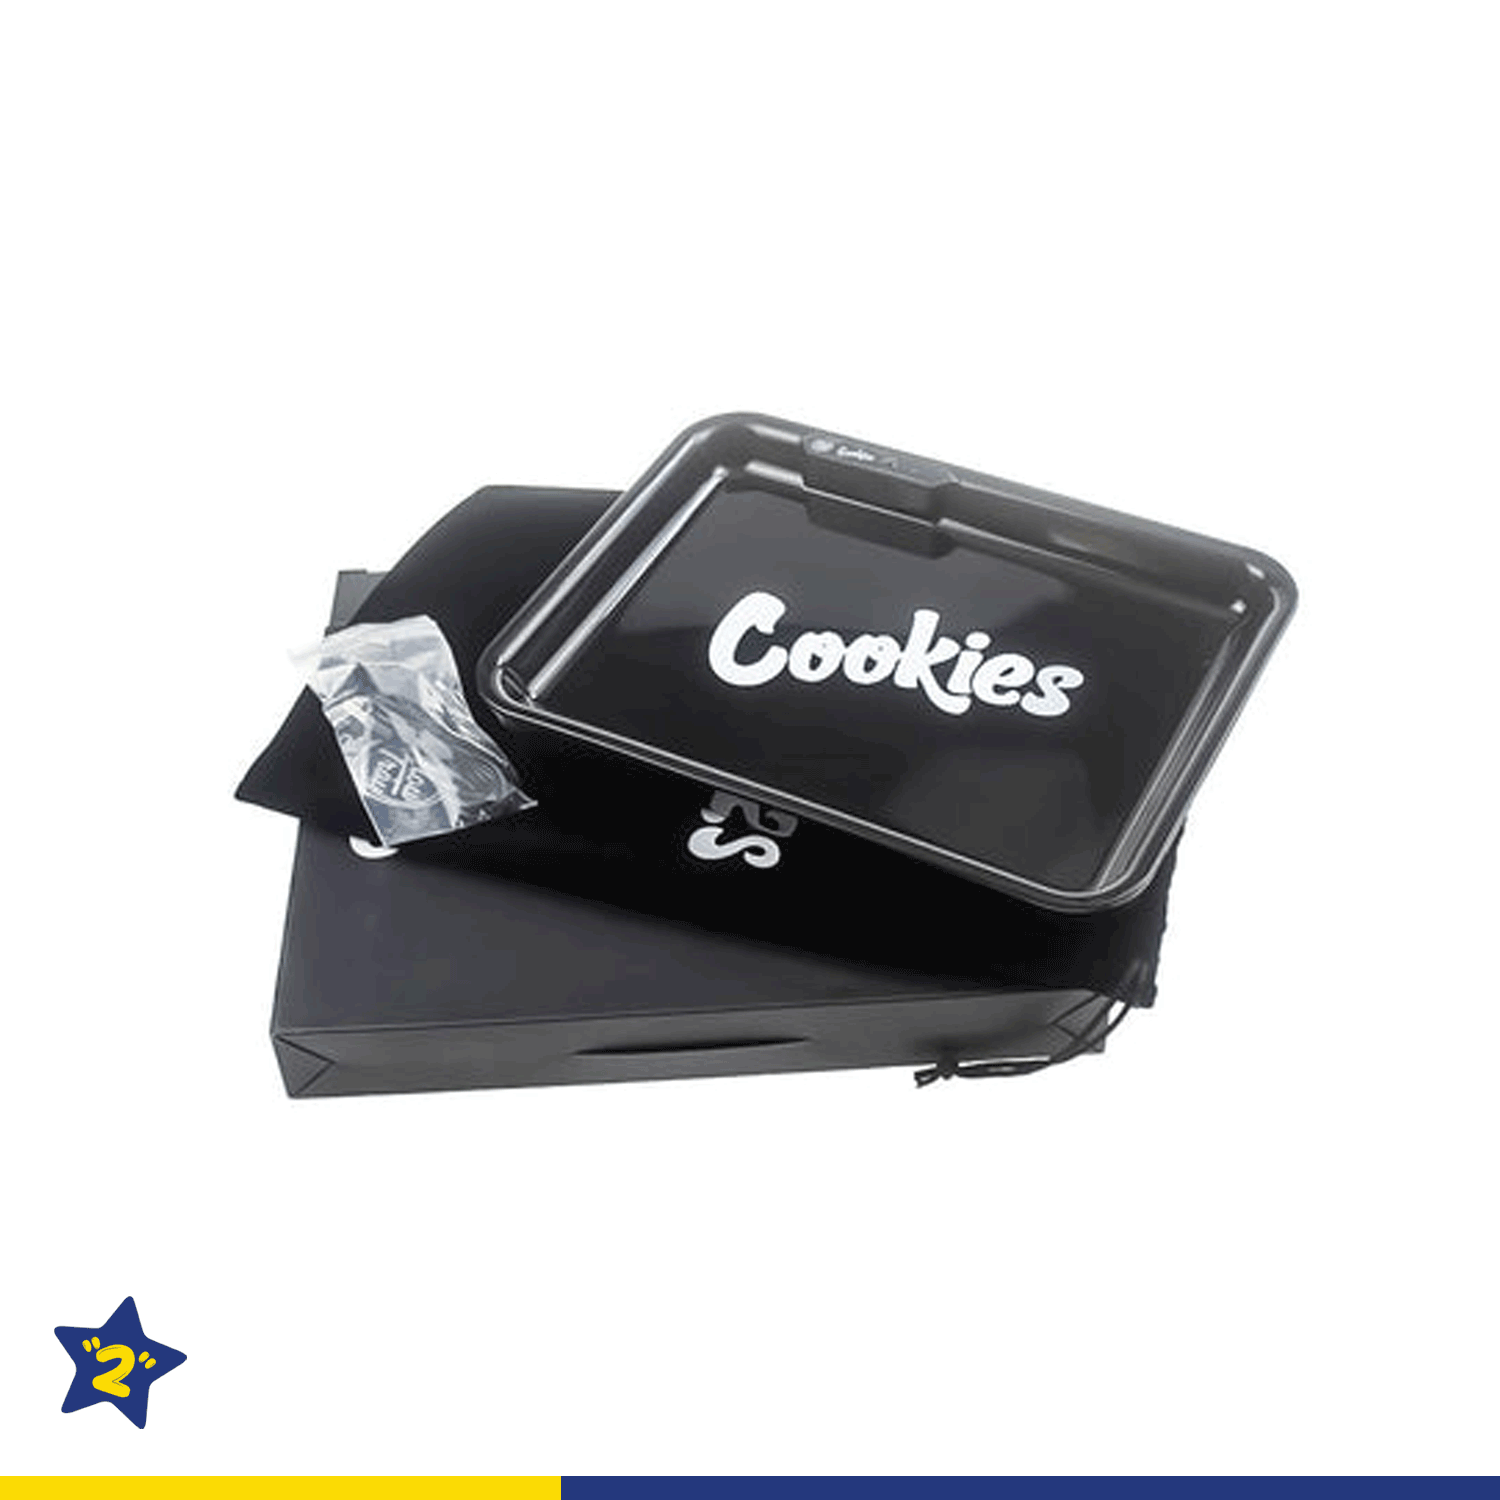 Cookies LED Glow Rolling Tray Black